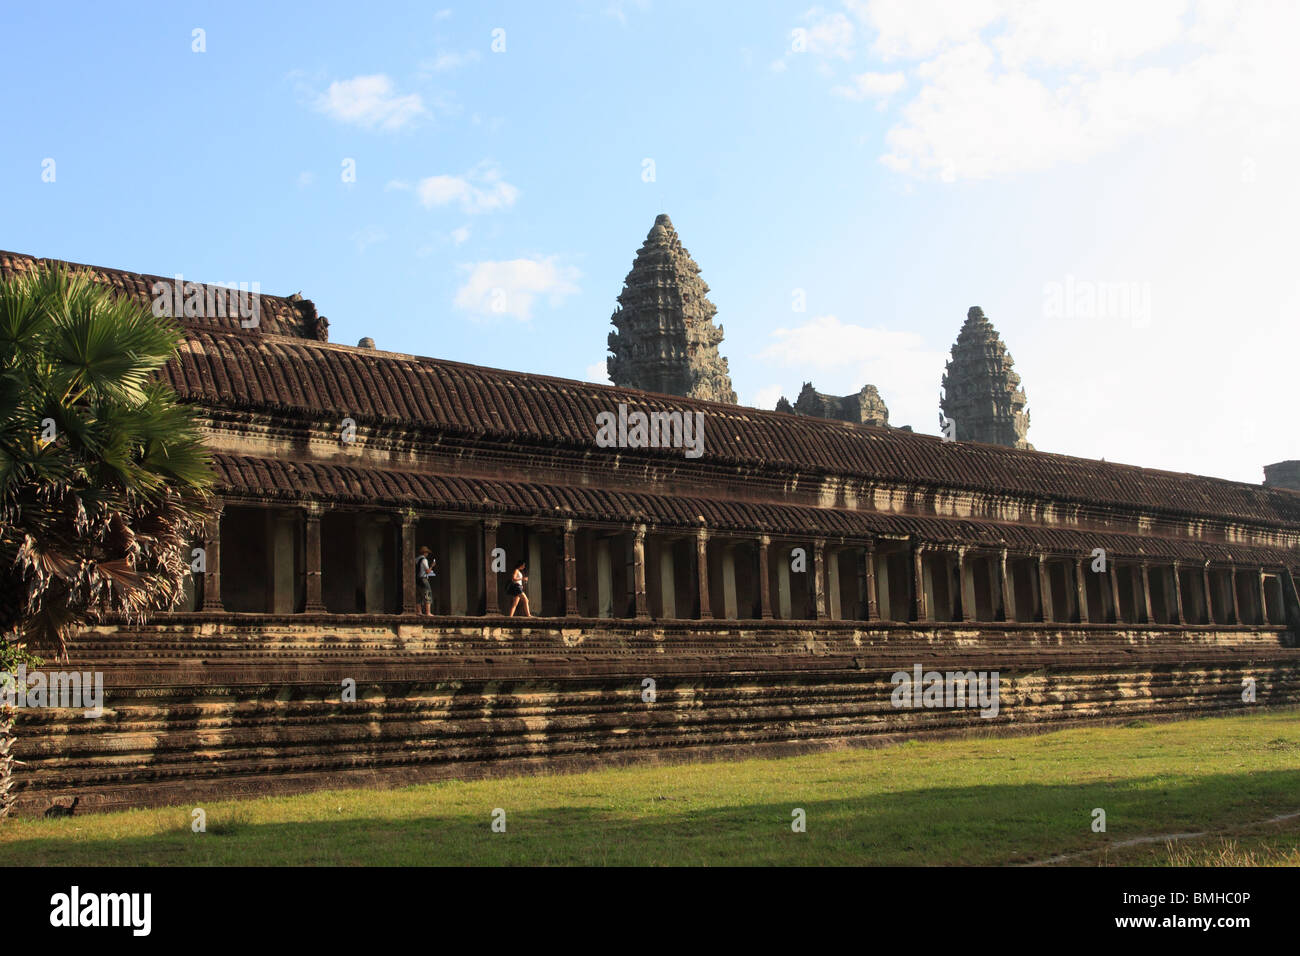 Southern galleries of Angkor Wat temple, Cambodia Stock Photo